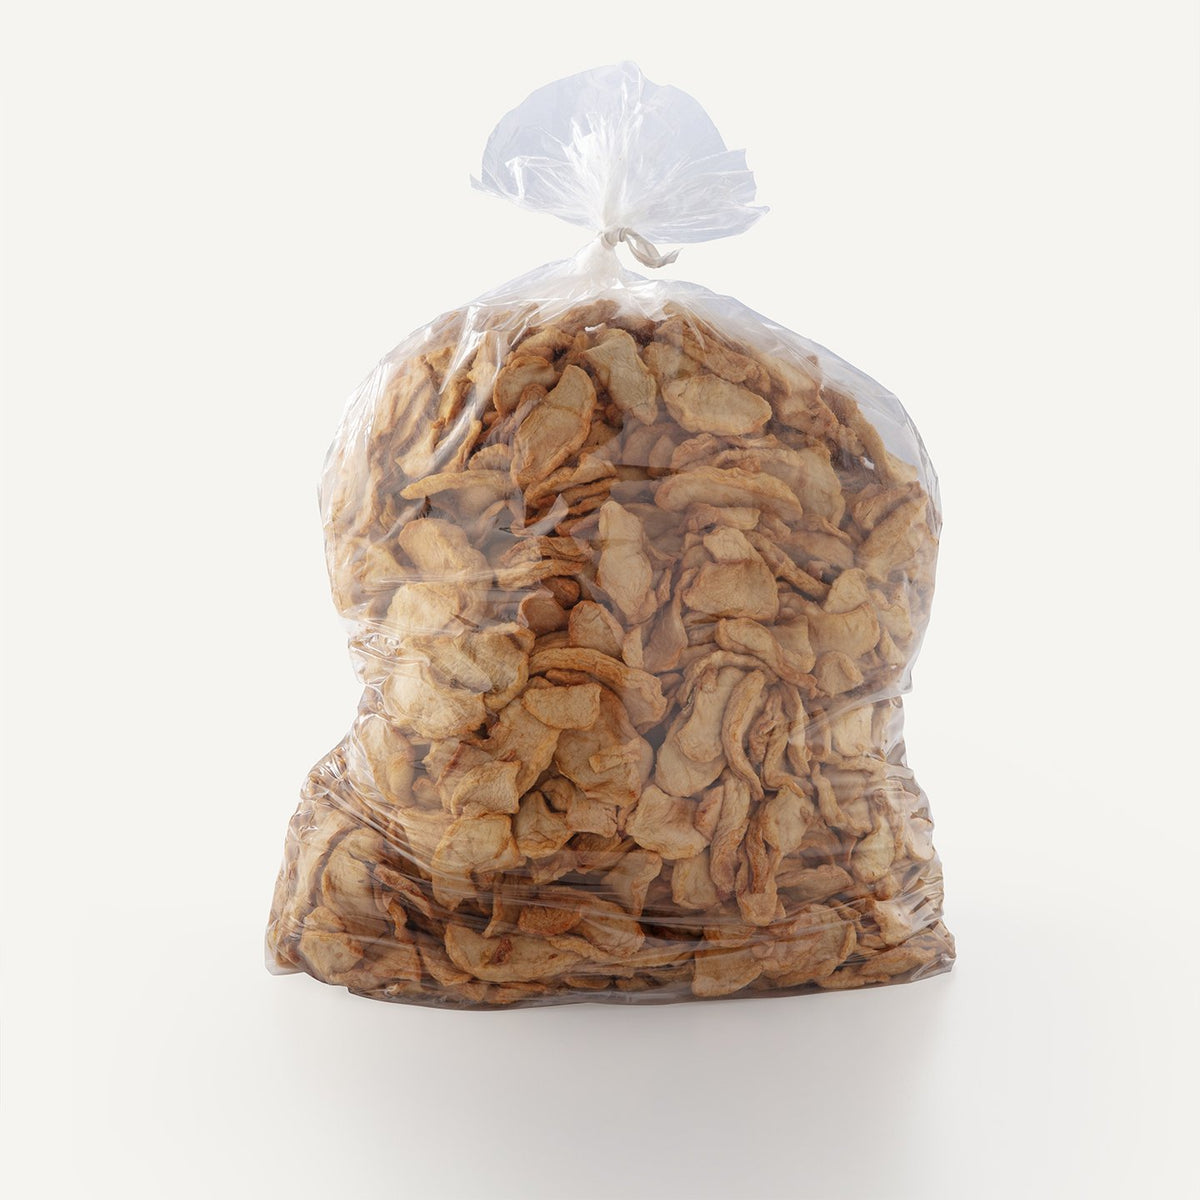 Large bag of dried apples